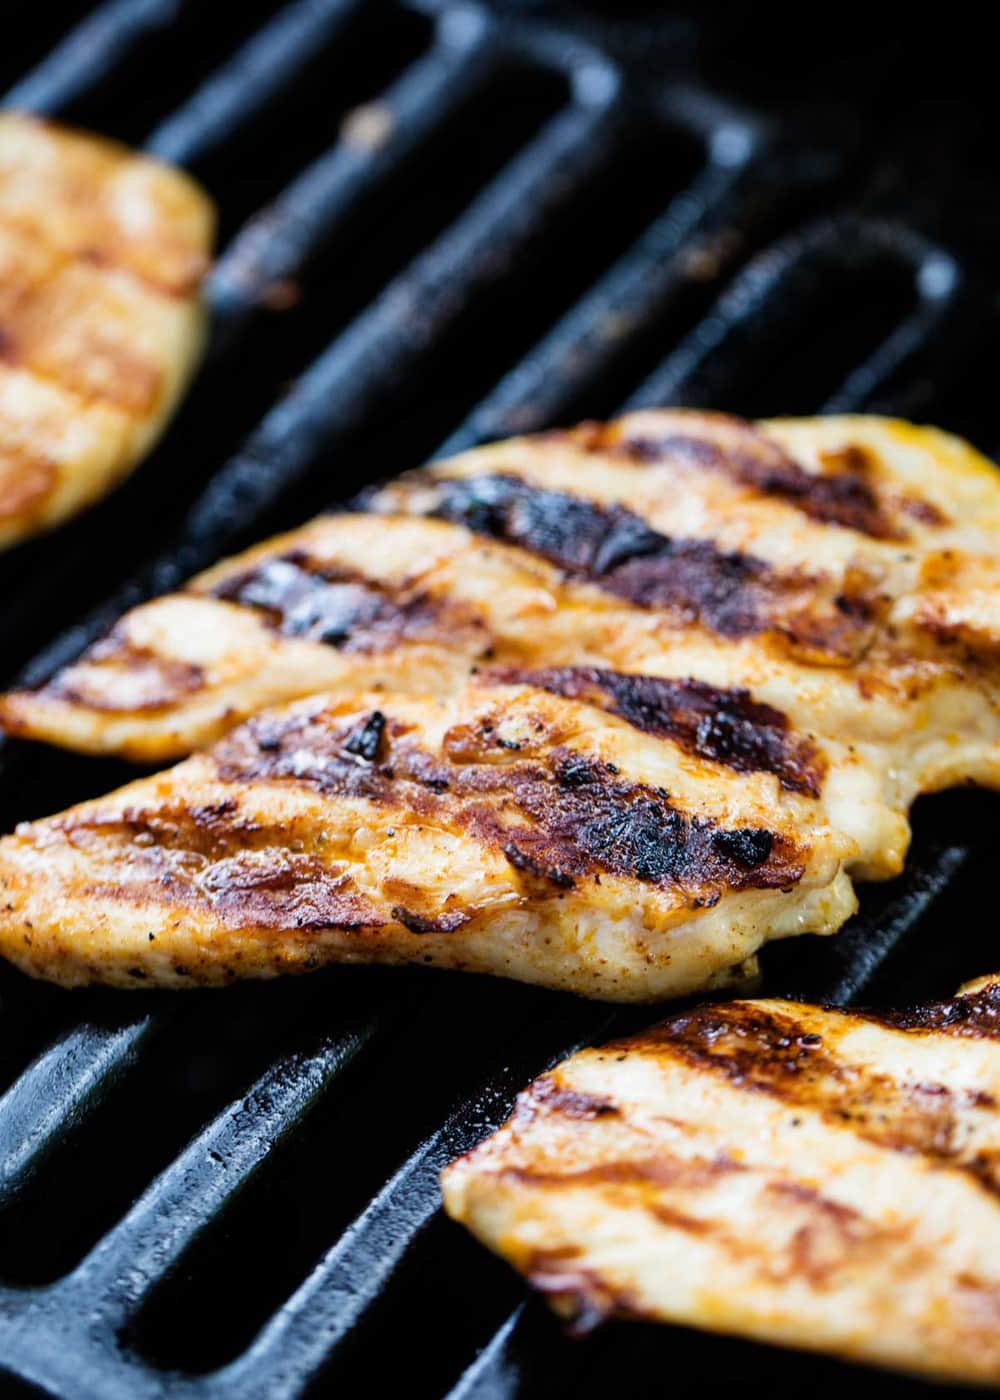 Grilled chicken on the bbq.